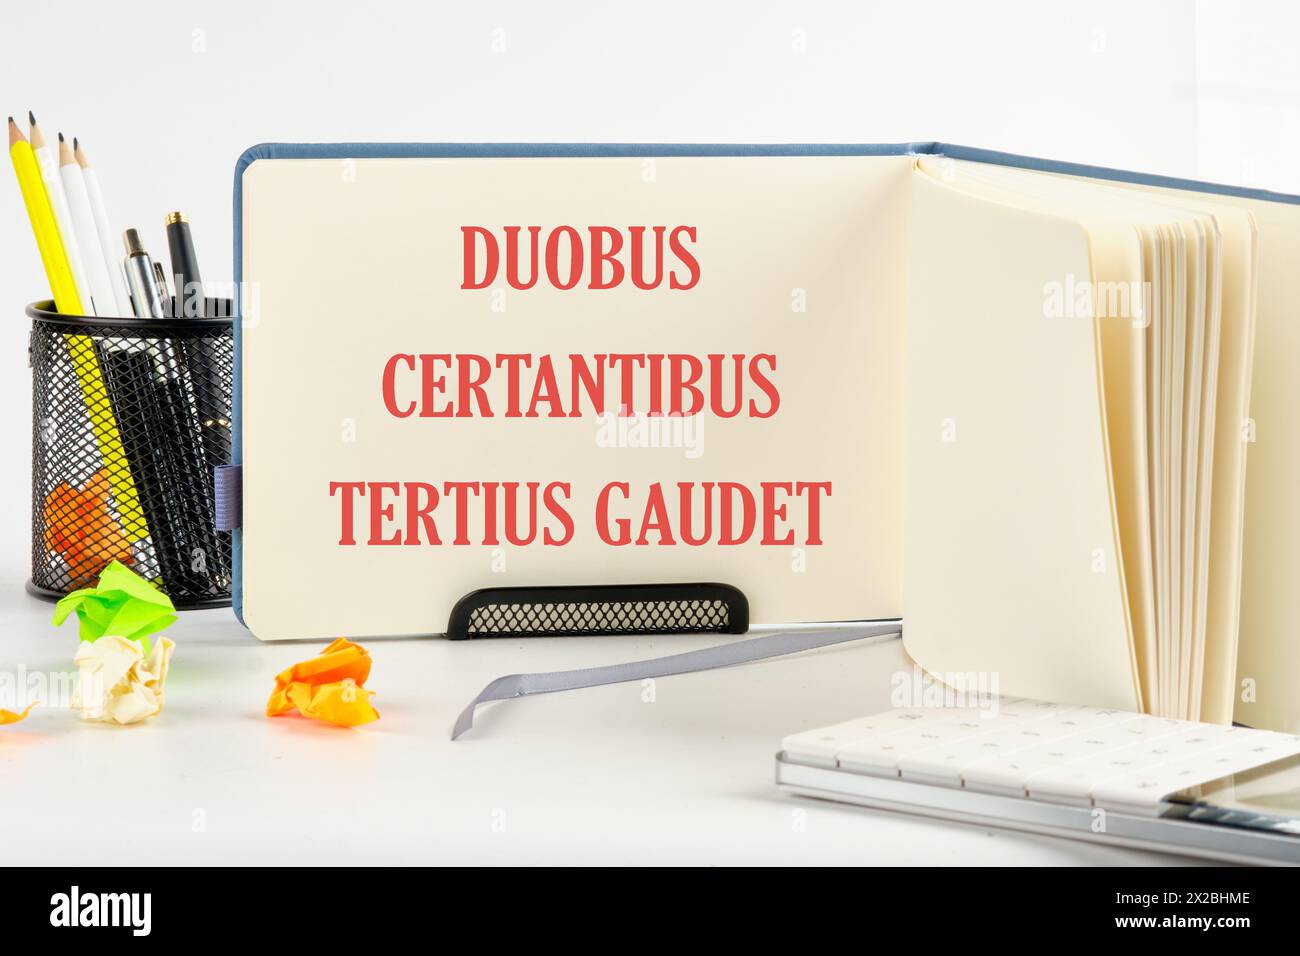 DUOBUS CERTANTIBUS TERTIUS GAUDET it means in Latin While two argue, the third rejoices. on a blank sheet of an open business notebook Stock Photo